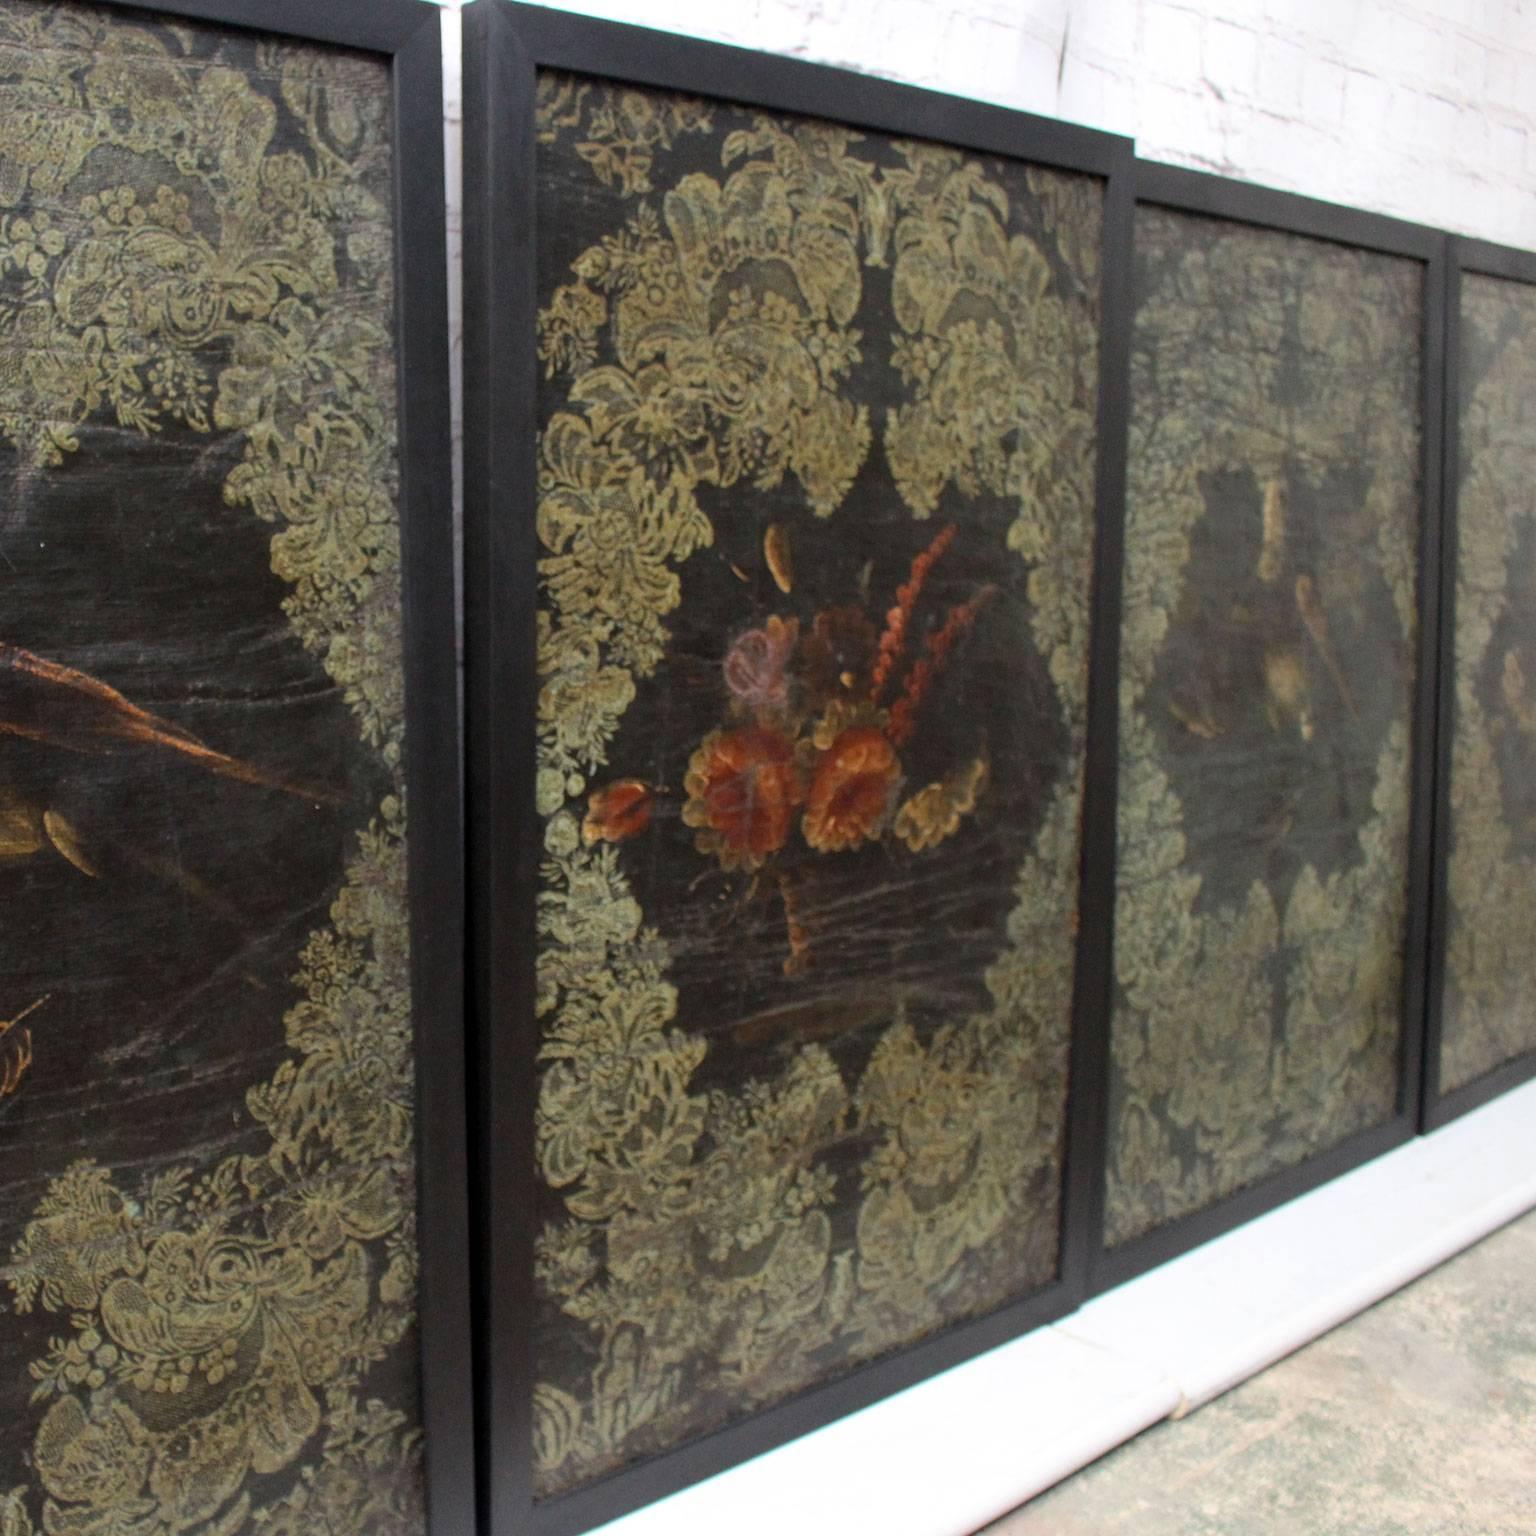 This set of incredible 17th century Spanish wall hangings has been painstakingly conserved by Charlotte. They are oil paintings on a wide weave hessian which helps us date them to the late 17th century. We love their moodiness and depth. There is a